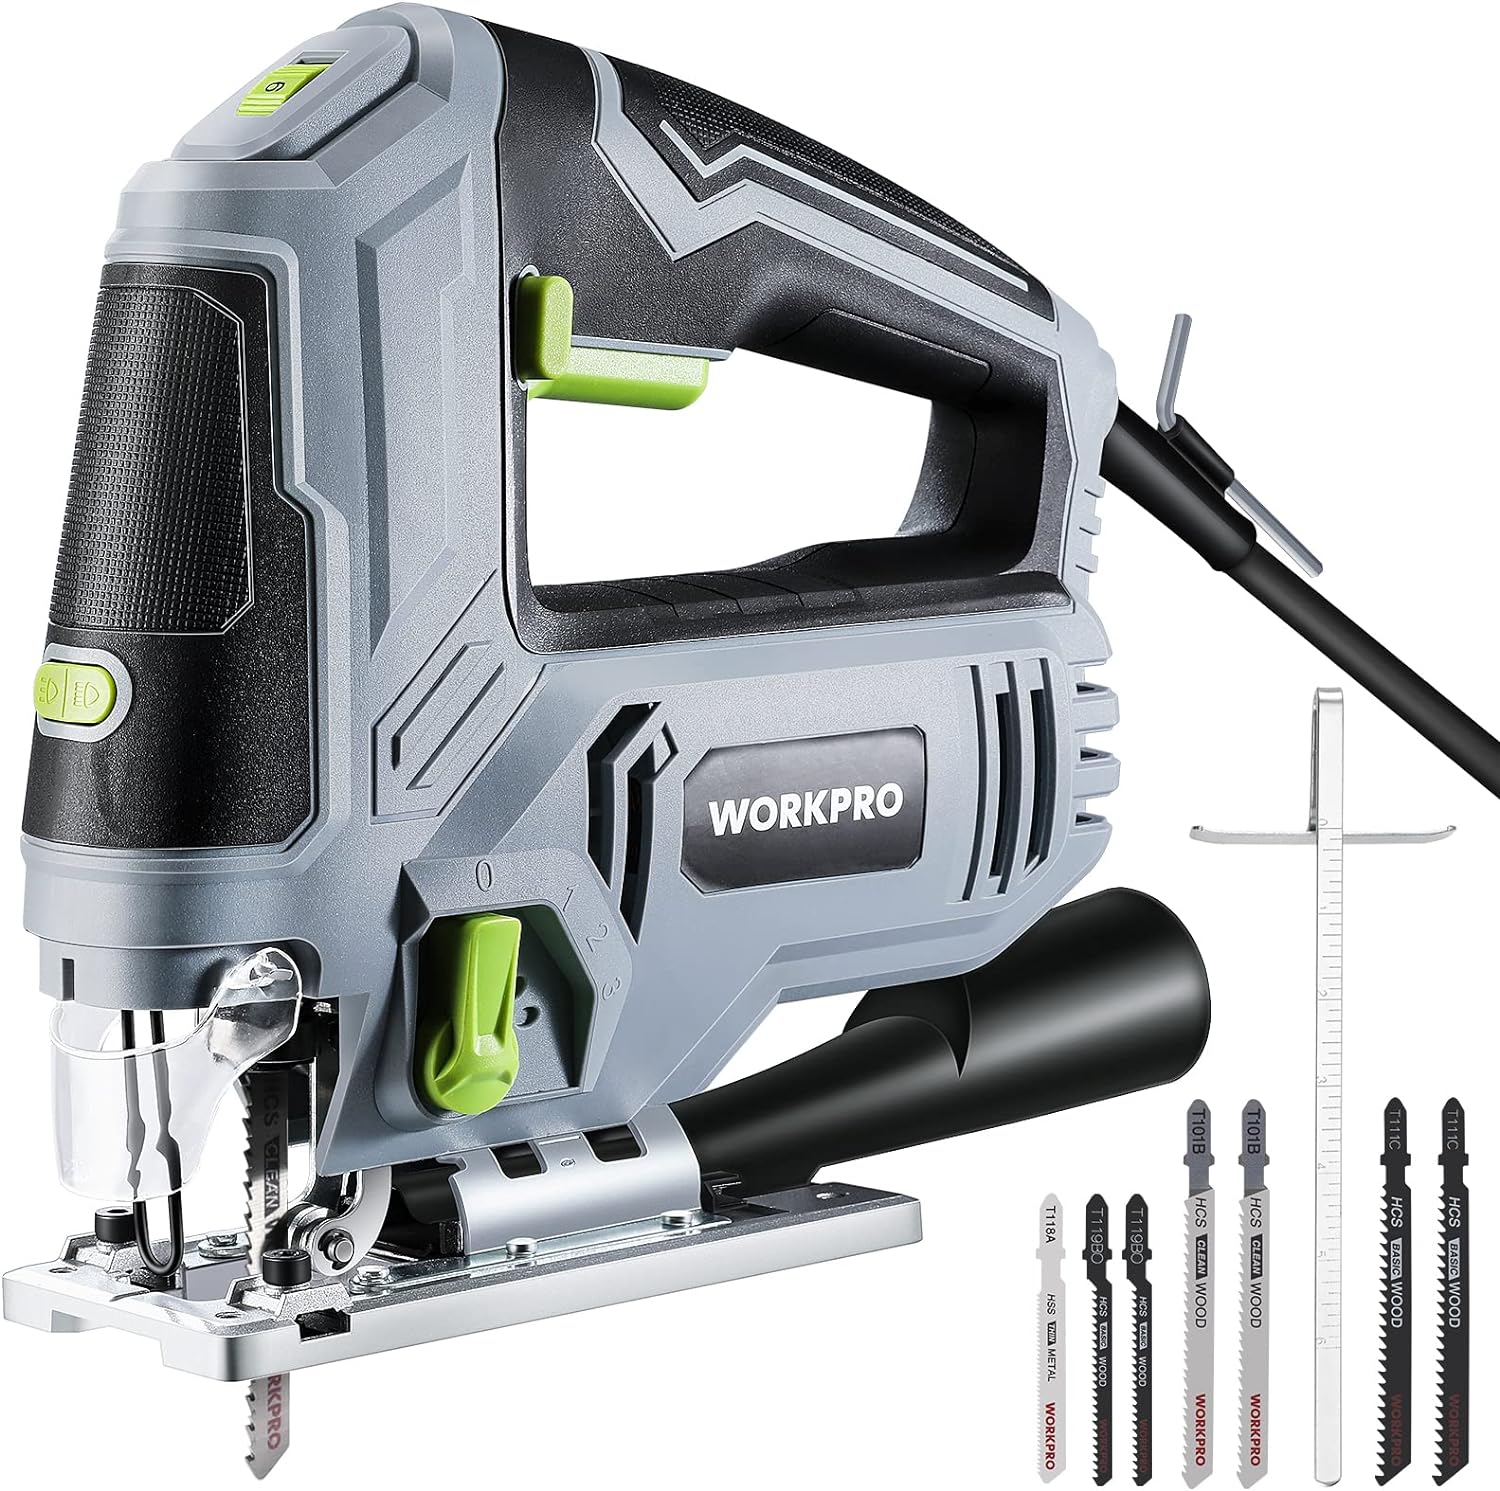 WORKPRO Jigsaw, 6.5AMP 850W Corded Electric Jig Saw Tool Kit with 6 Variable Speeds, 7 Blades, &#194;&#177;45&#194;&#17